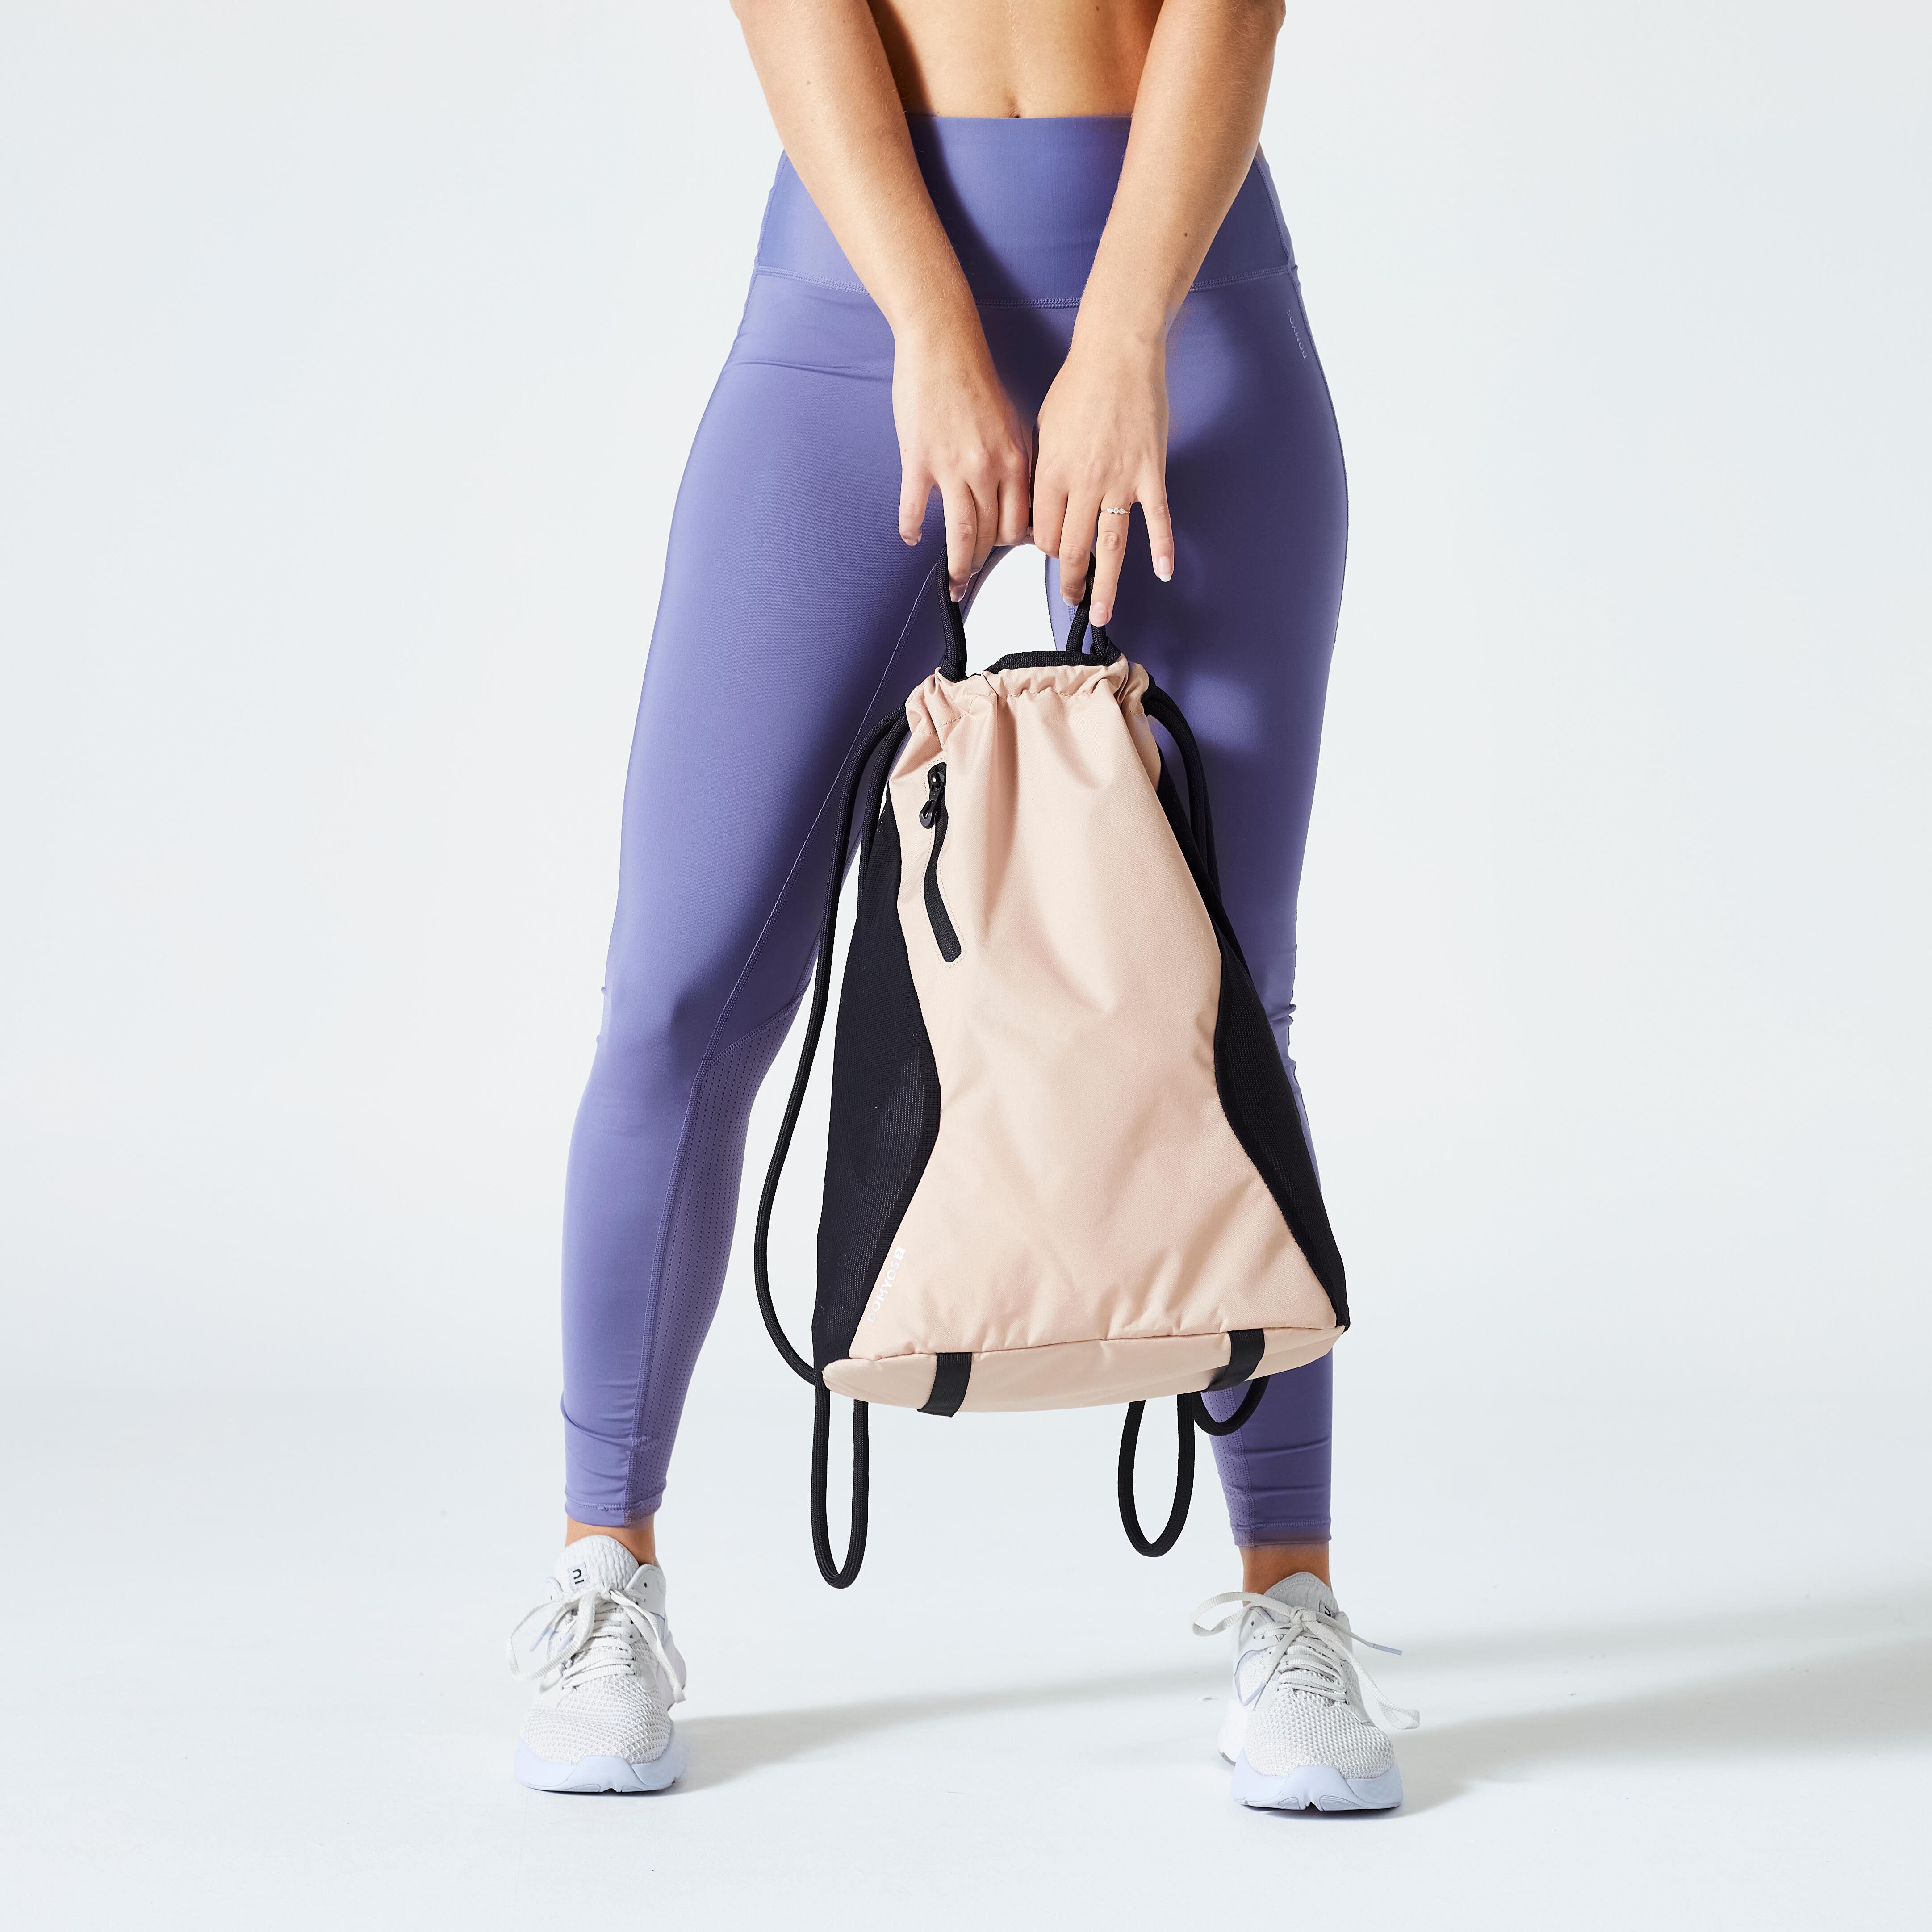 15 Gym Bag Essentials You Need for Your Next Workout